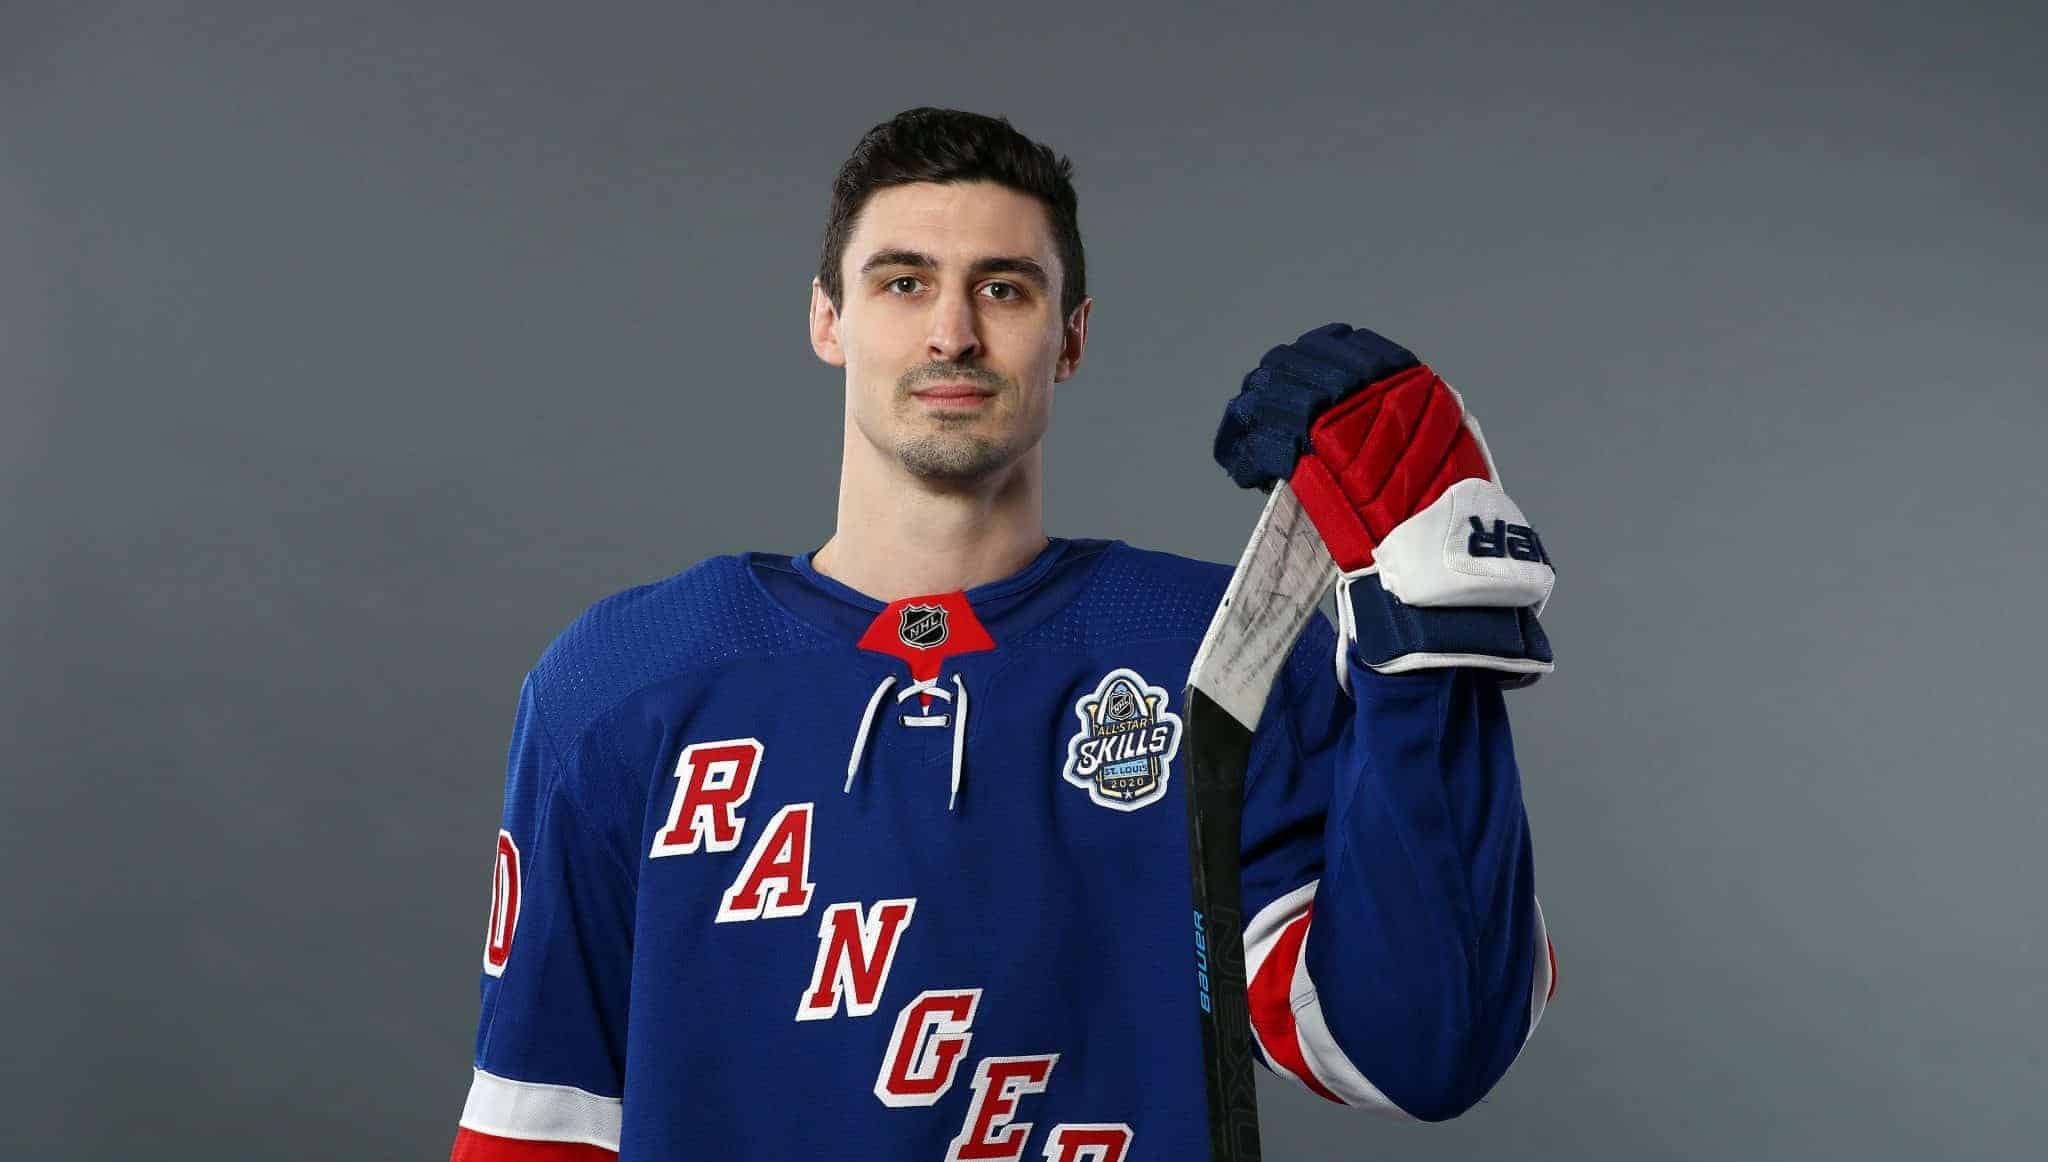 ST LOUIS, MISSOURI - JANUARY 24: Chris Kreider #20 of the New York Rangers poses for a portrait ahead of the 2020 NHL All-Star Game at Enterprise Center on January 24, 2020 in St Louis, Missouri.